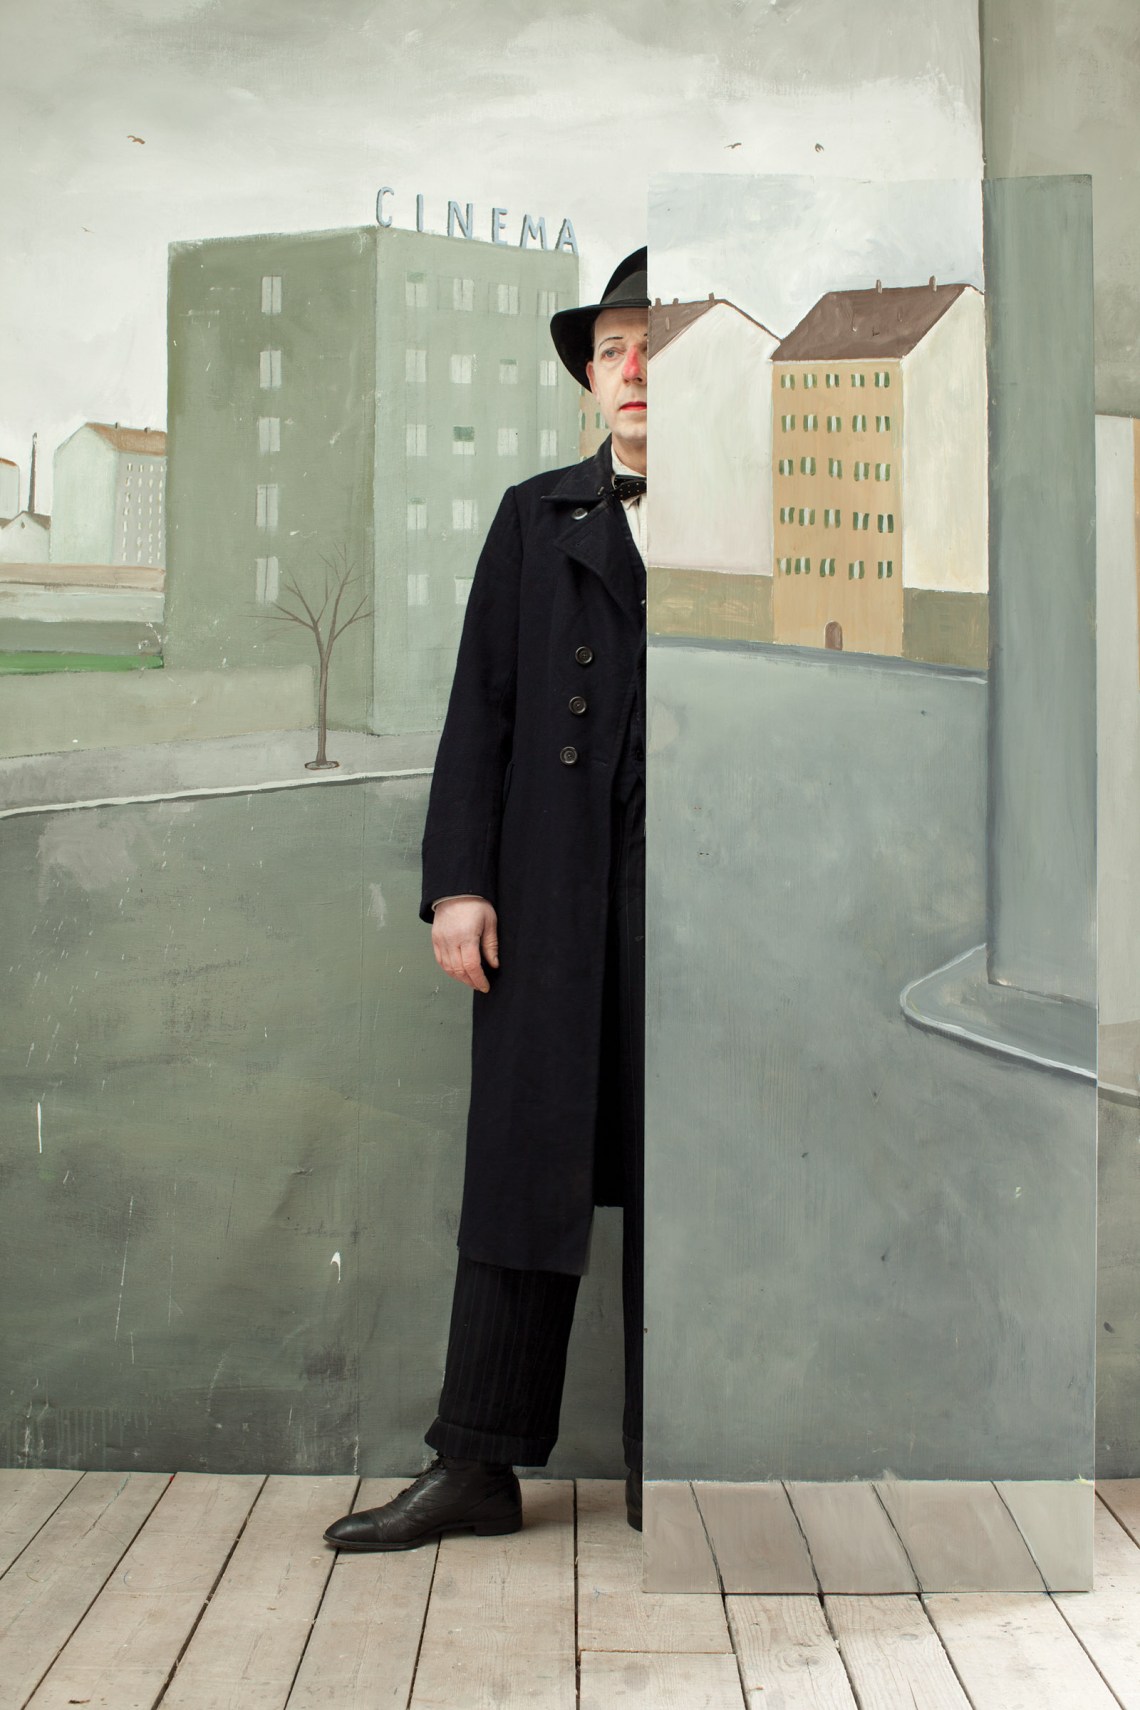 The Vanishing Man; painting by Paolo Ventura